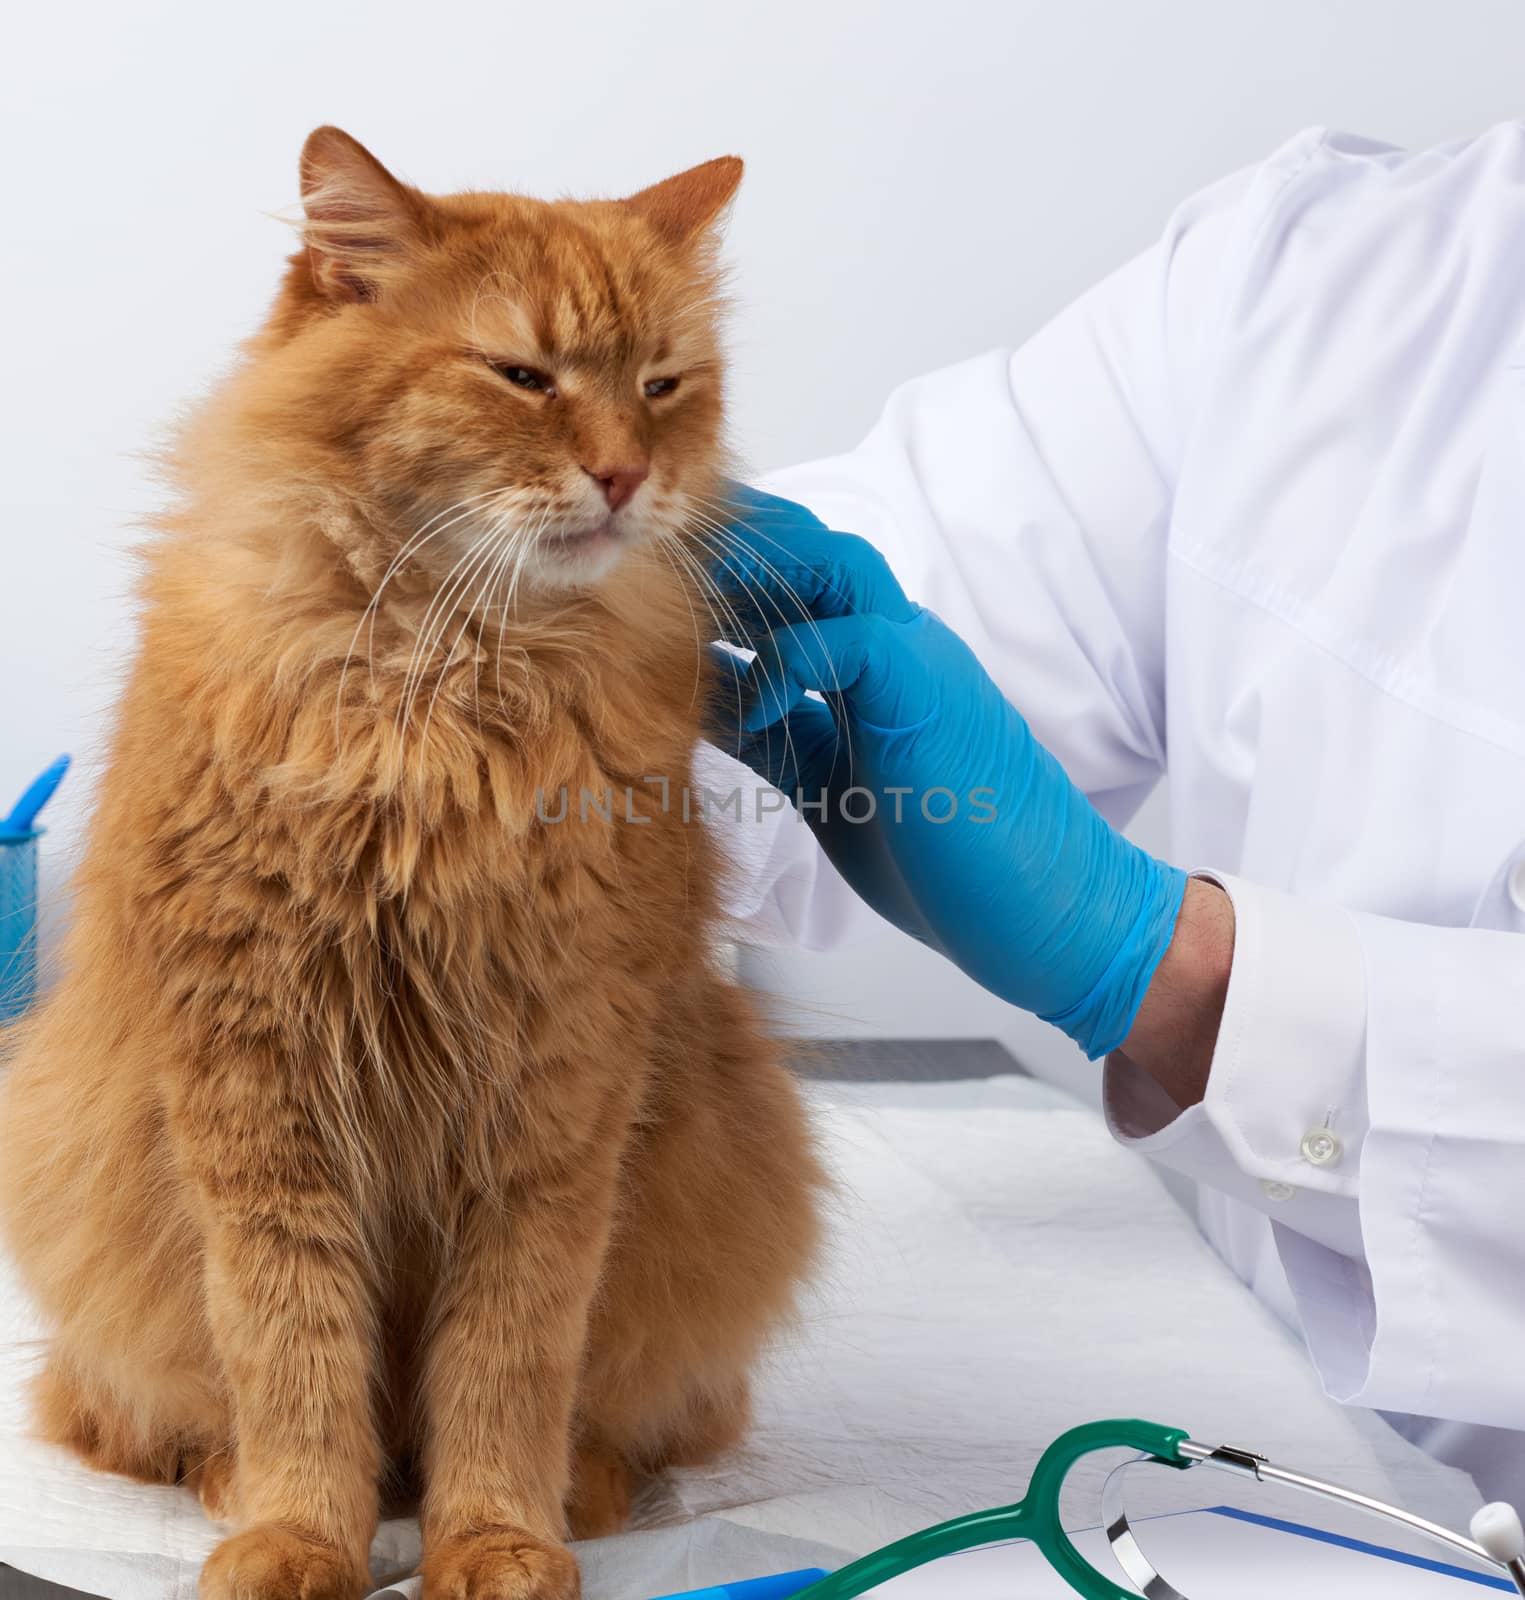 vet doctor in a white medical coat sits at a table and examines an adult fluffy red cat, vet workplace, white background